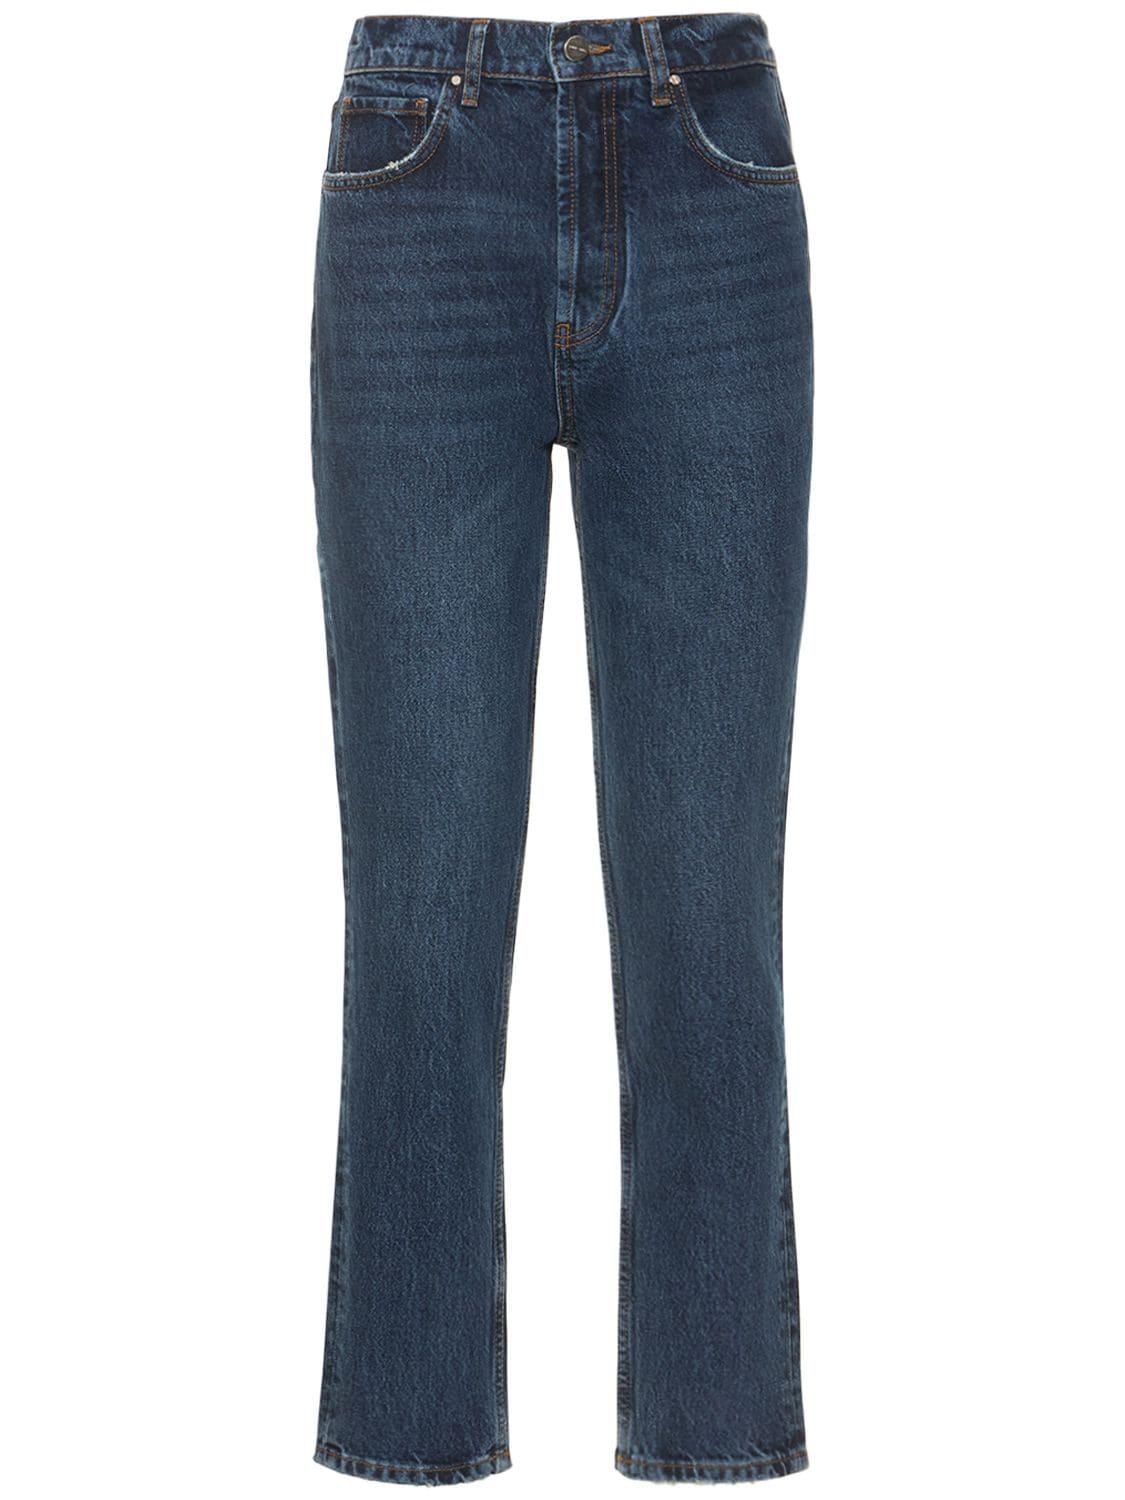 Anine Bing Sonya High Rise Straight Jeans in Blue | Lyst